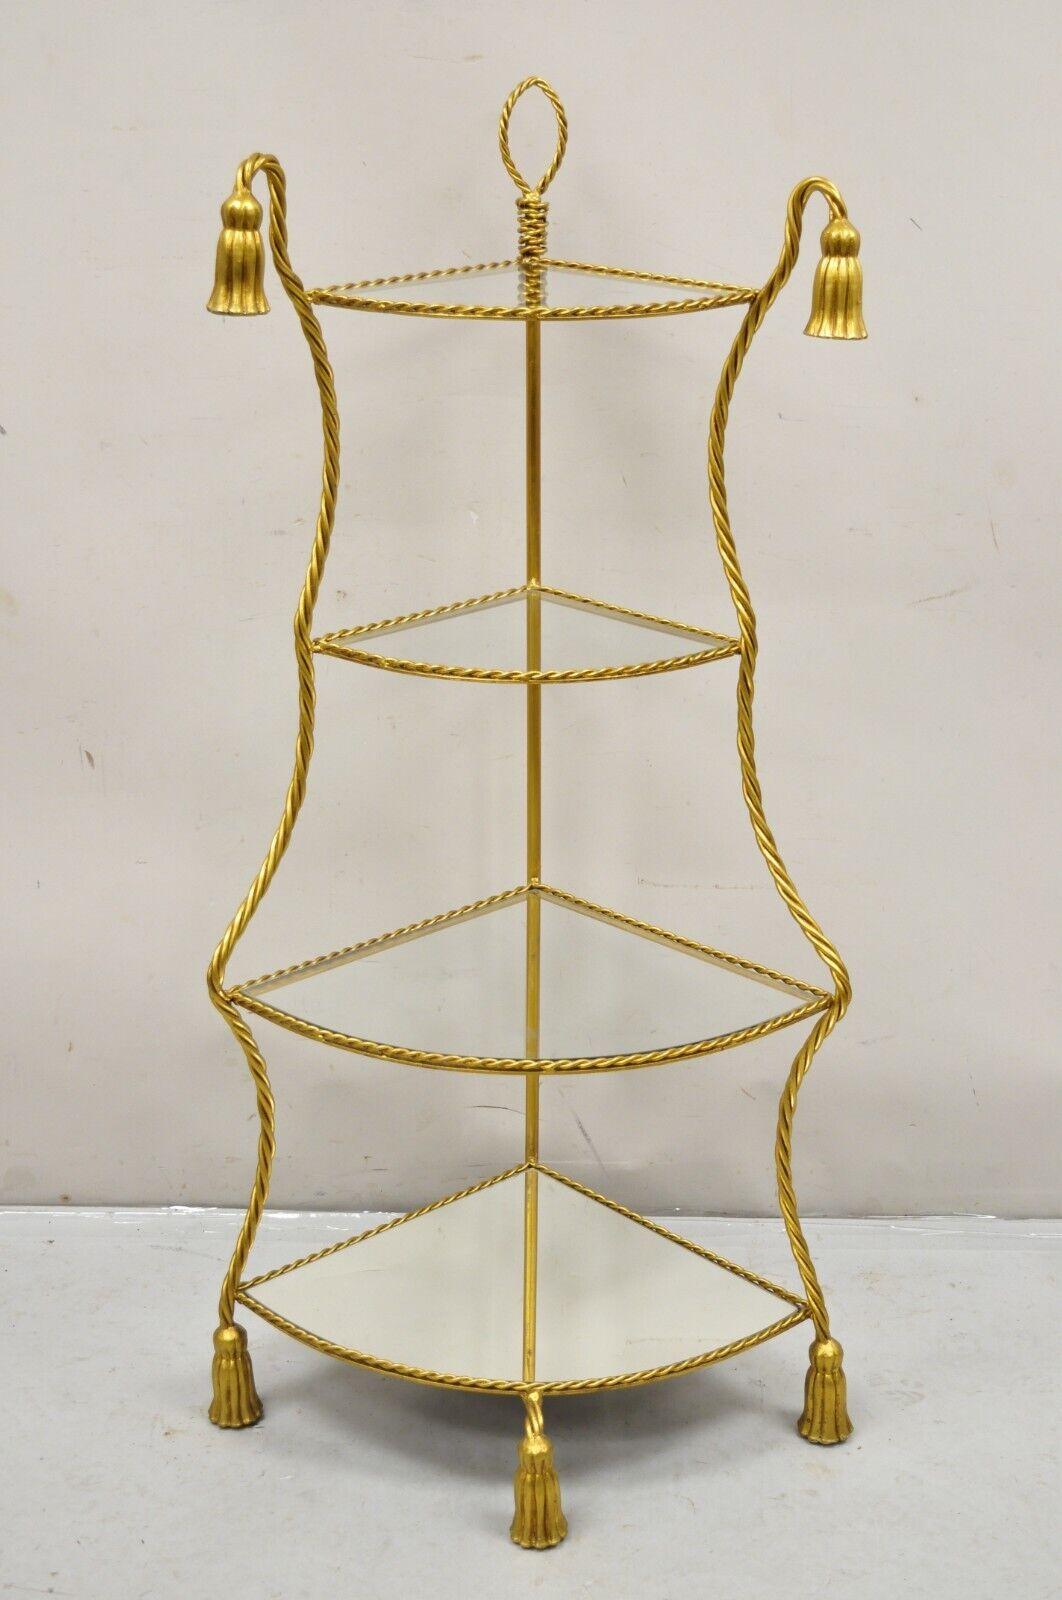 Italian Hollywood Regency Gold Gilt Iron Rope Tassel 4 Tier Etagere Corner Shelf. Item features a  mirror lower shelf, 3 clear glass upper shelves, wrought iron construction, gold gilt finish, vert nice vintage item. Circa Mid to Late 20th Century.